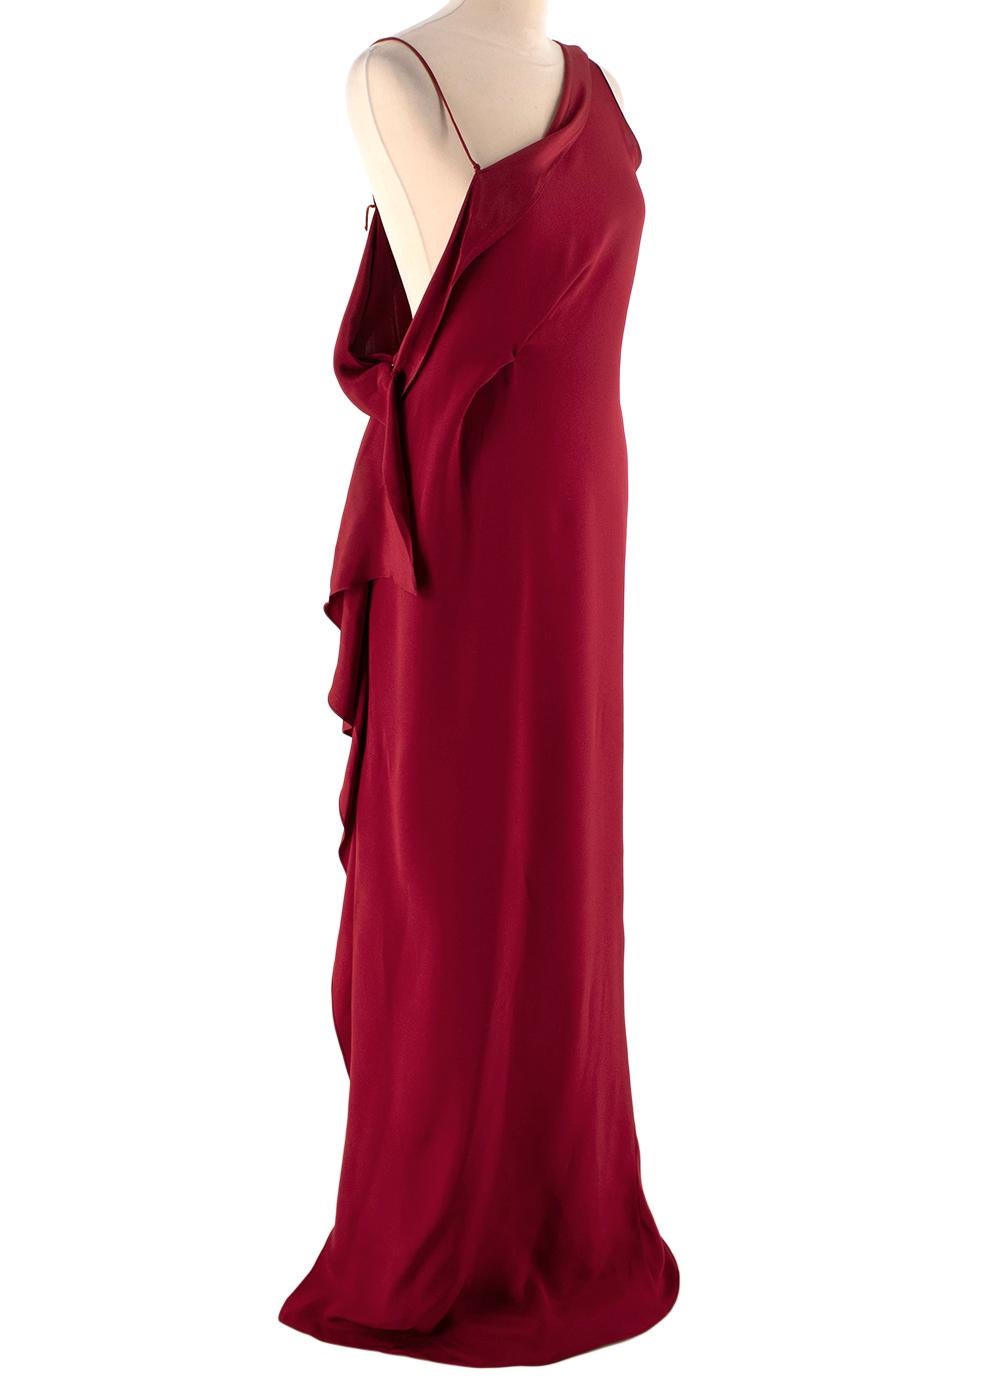 Roksanda Ilincic Silk Red Dress

Beautiful silk maxi one shoulder red dress. 

- Draped detail on the neckline
- Composition:Silk 100%
- Washing instructions: Dry Clean Only

PLEASE NOTE, THESE ITEMS ARE PRE-OWNED AND MAY SHOW SIGNS
OF BEING STORED